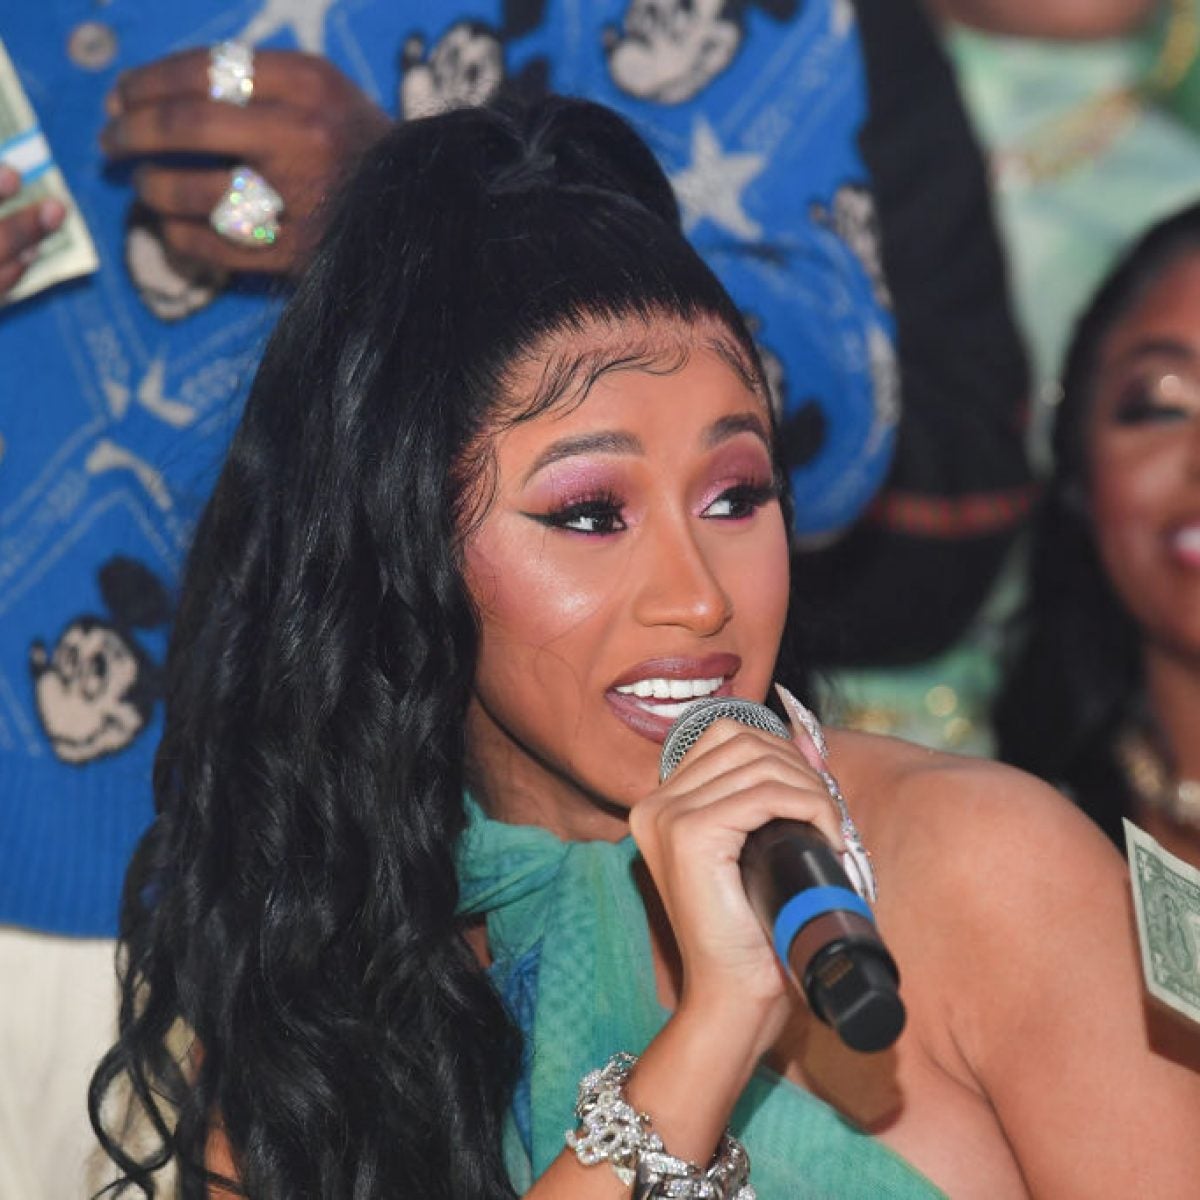 Cardi B Is Tired Of The Xenophobia Against Chinese Citizens: 'Let’s All Be One Race'